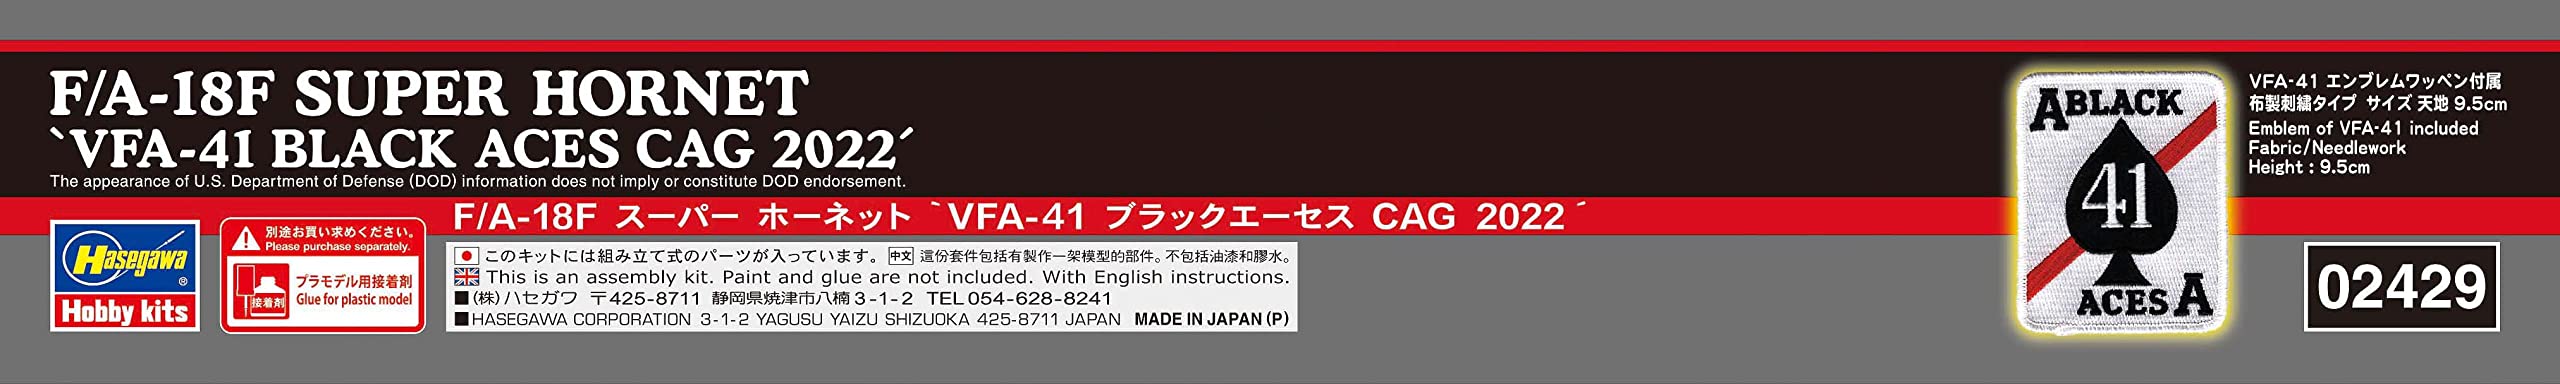 Hasegawa 1/72 F/A-18F SUPER HORNET VFA-41 BLACK ACES CAG 2022 kit 2429 NEW_4